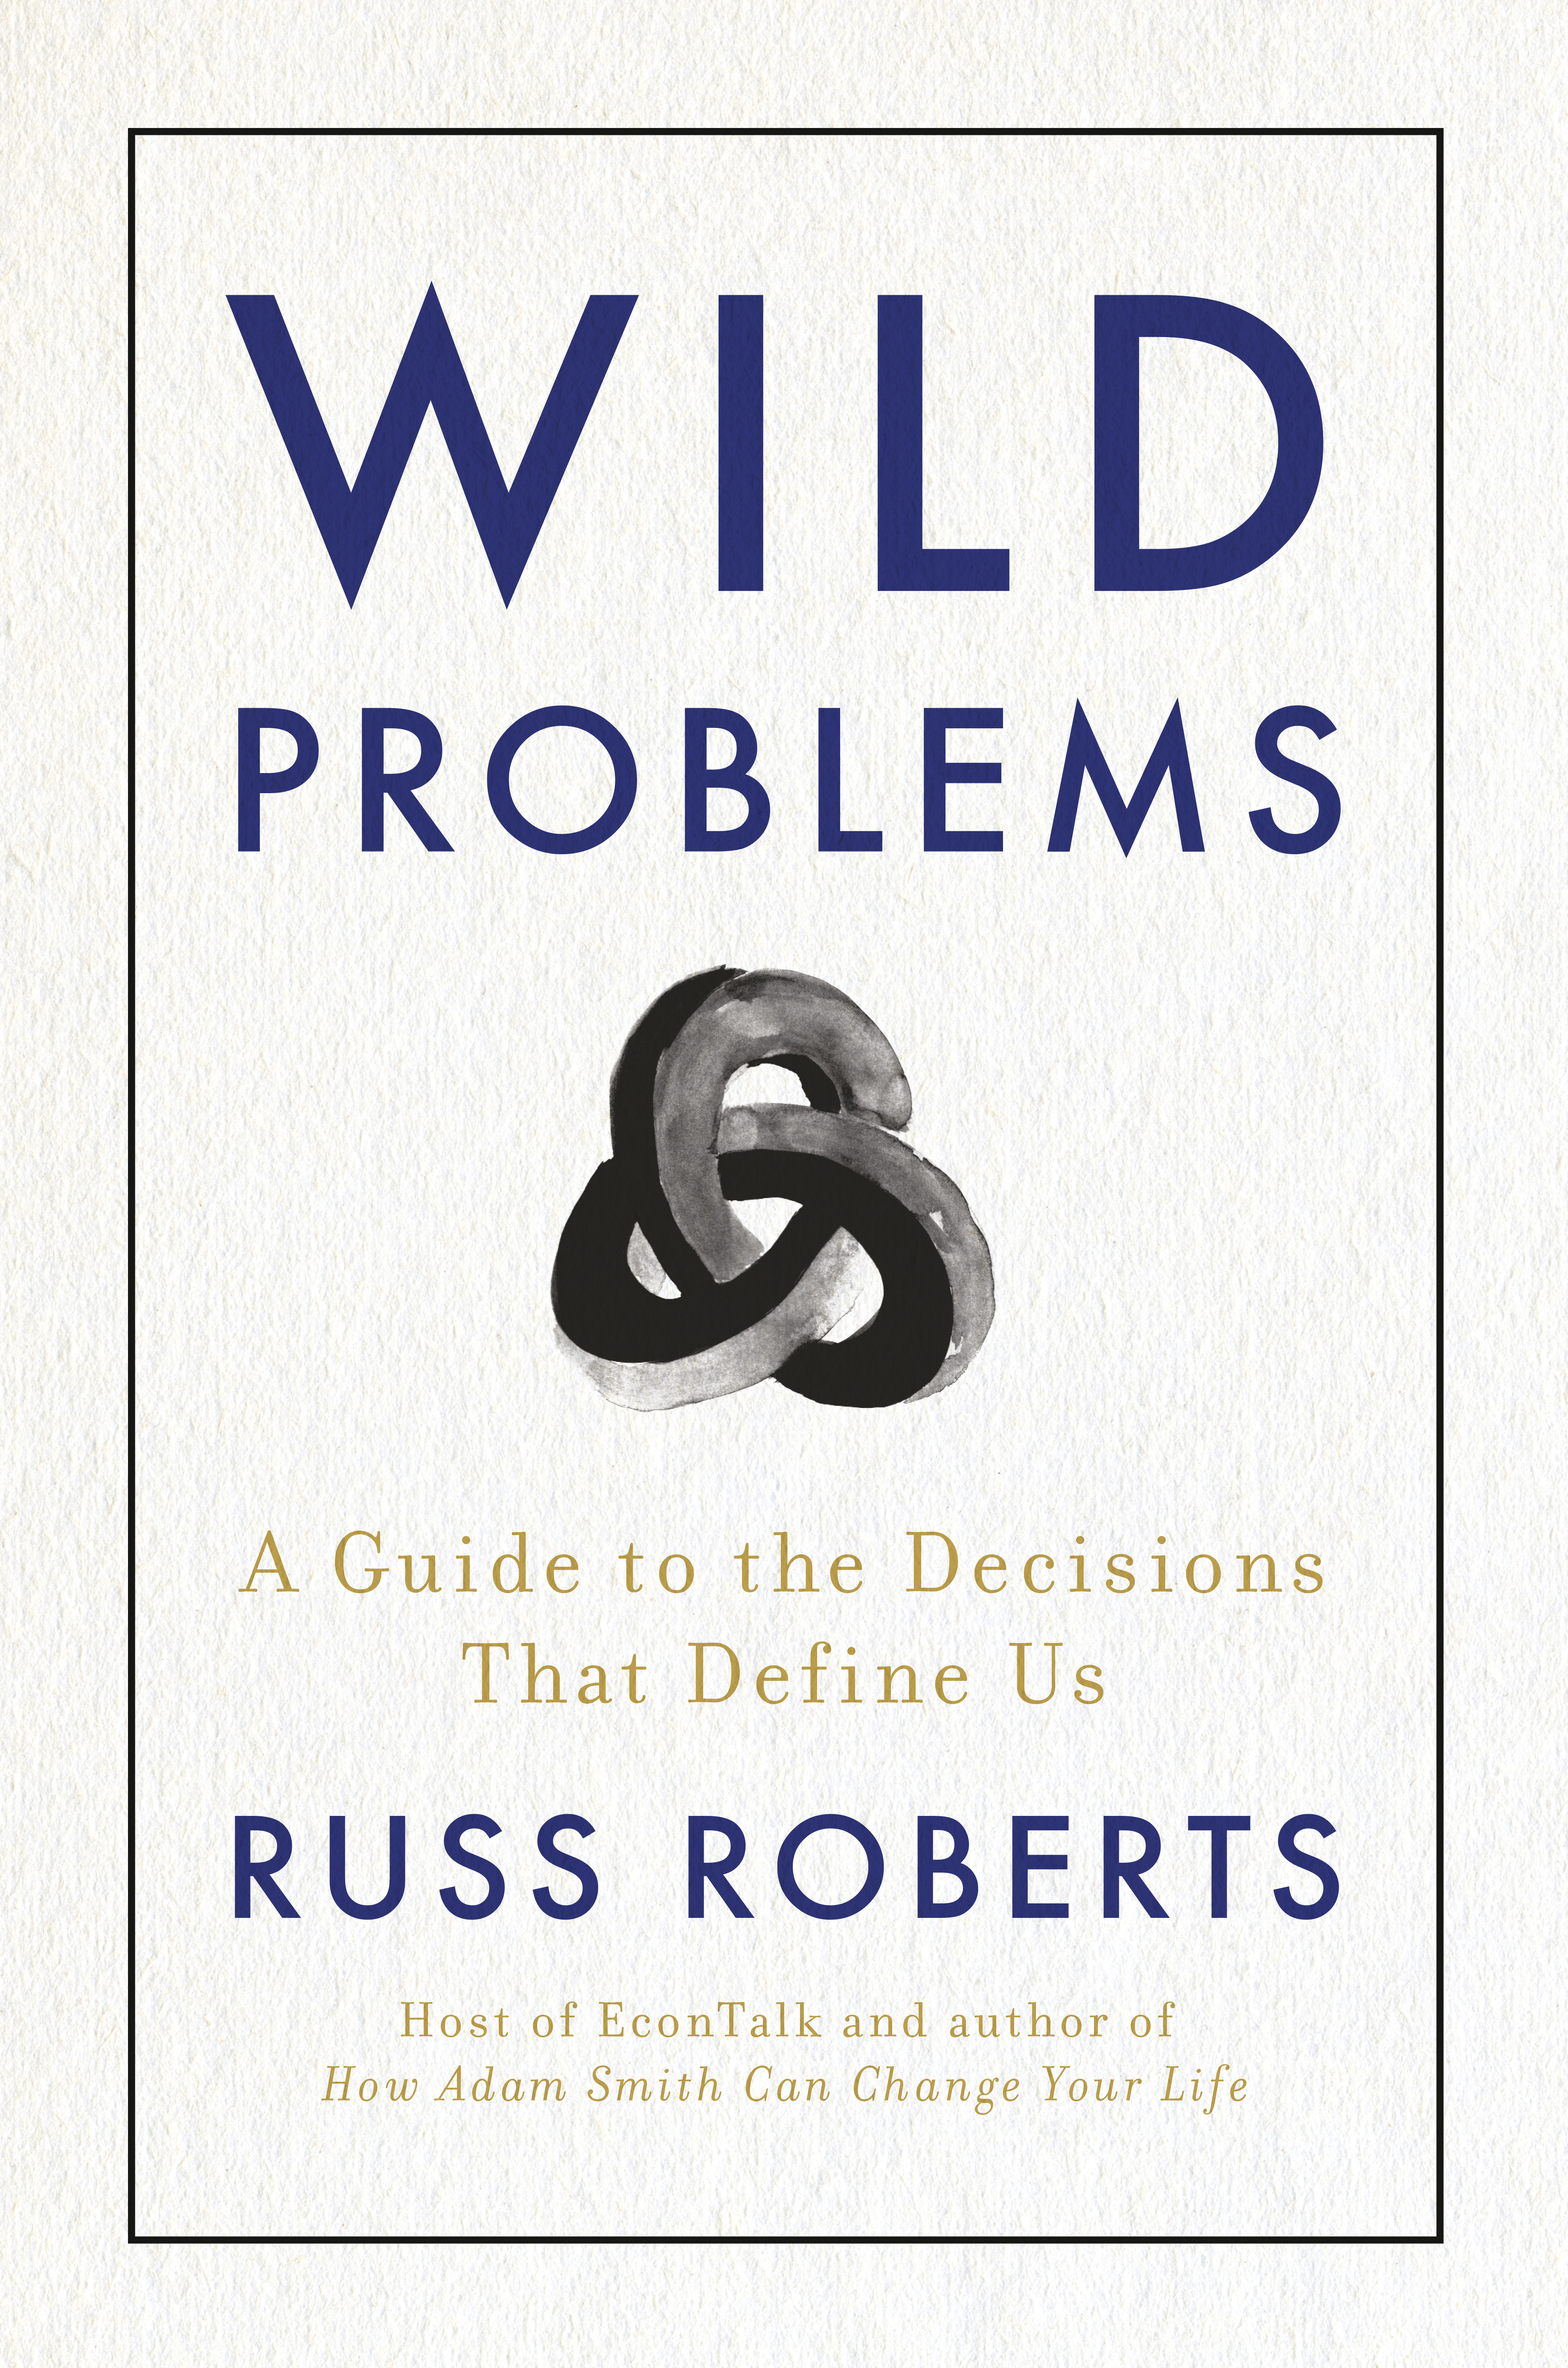 Wild Problems : A Guide to the Decisions That Define Us | Business & Management